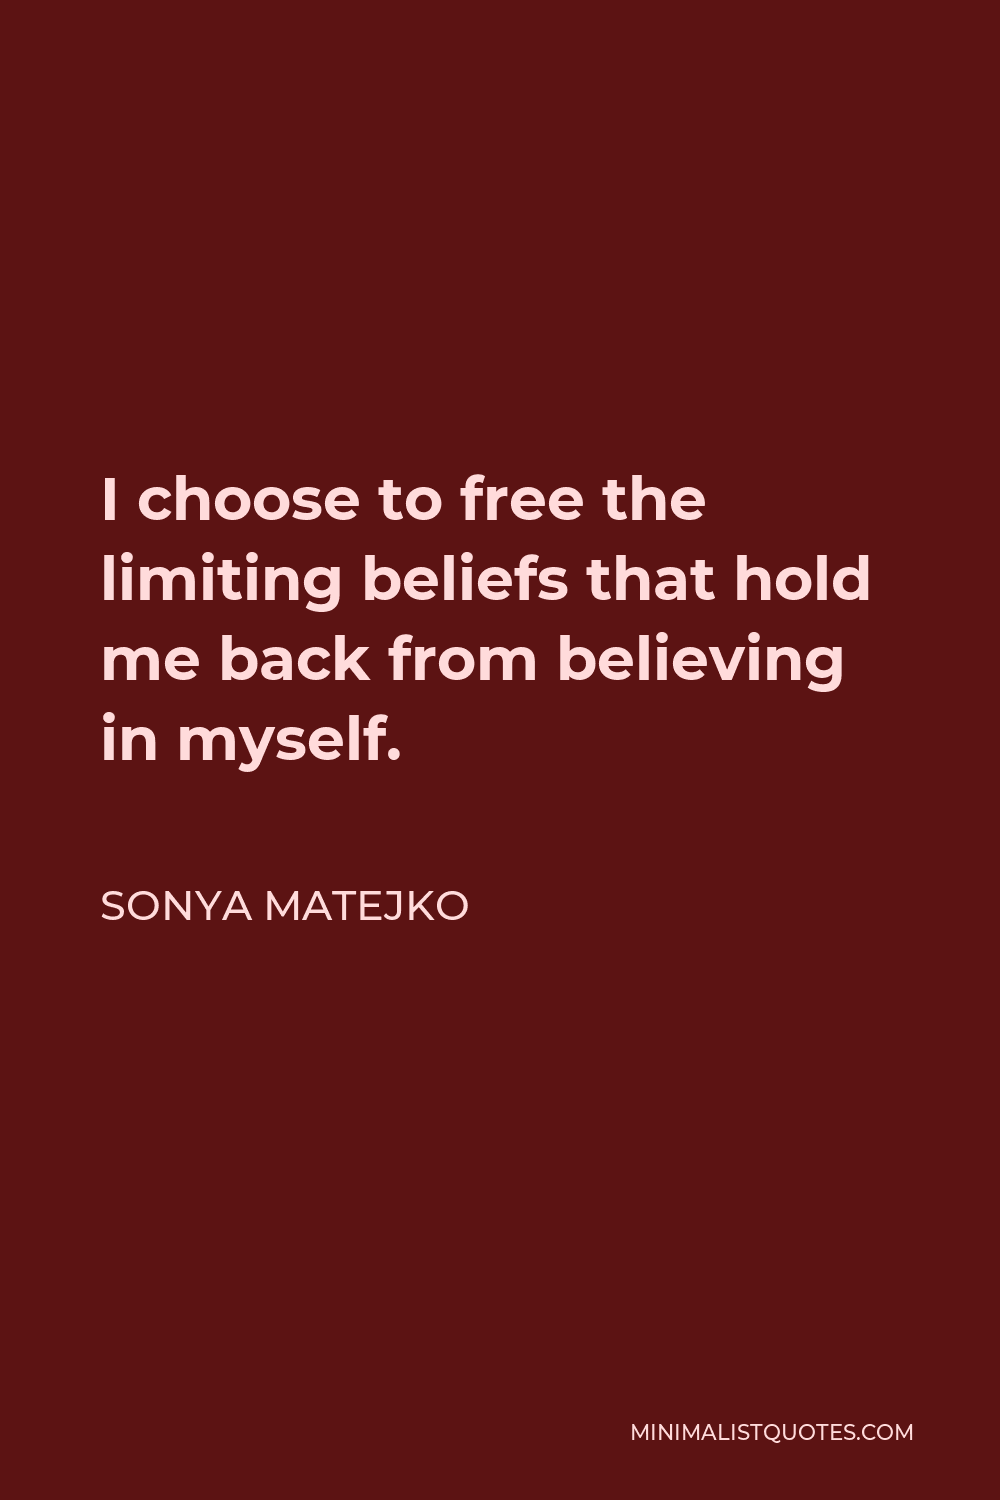 Sonya Matejko Quote - I choose to free the limiting beliefs that hold me back from believing in myself.